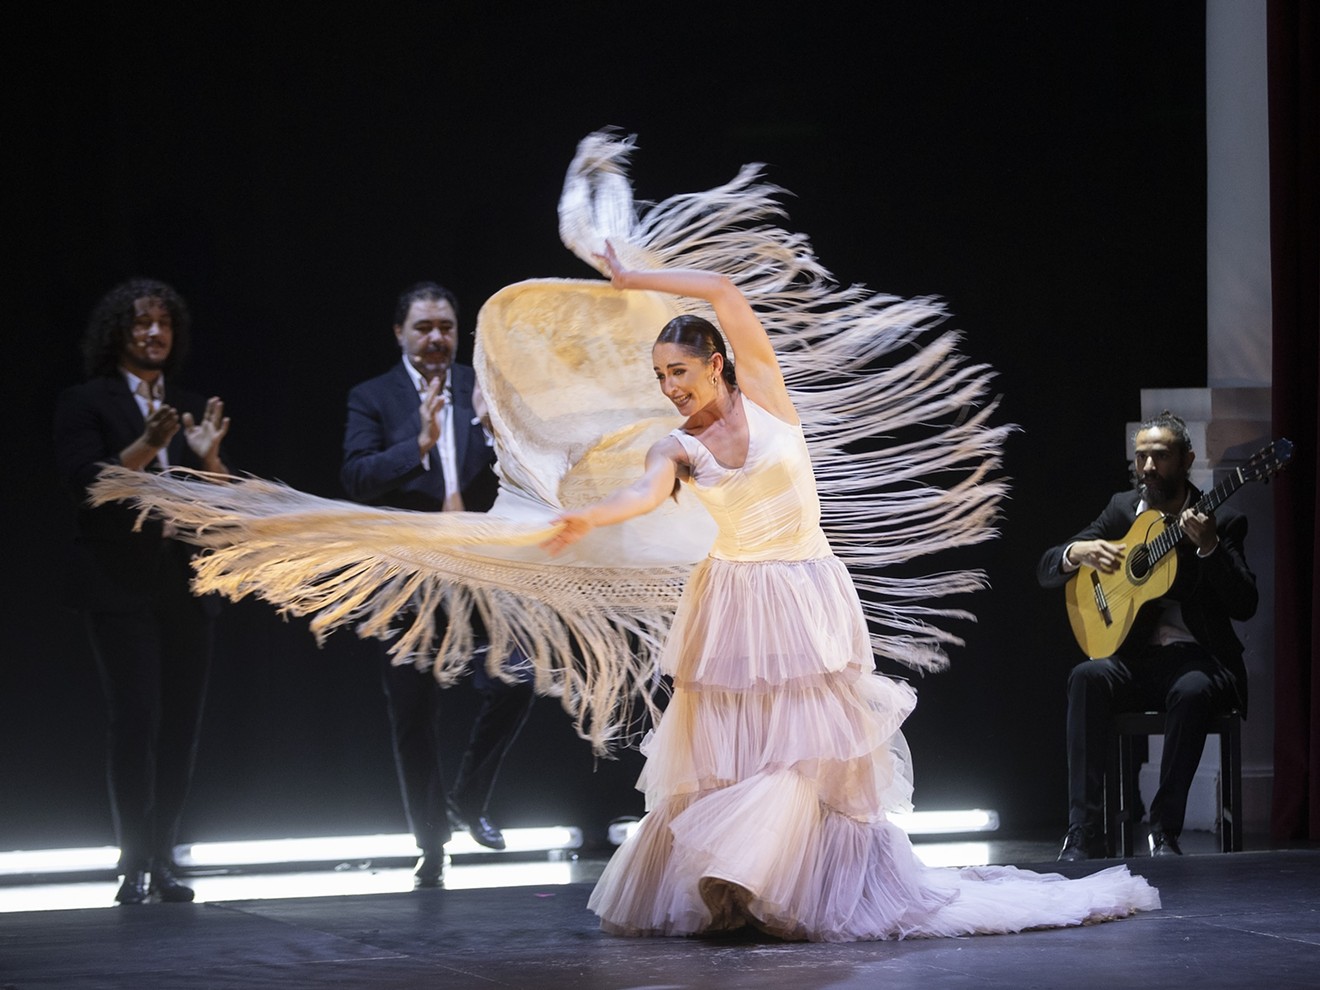 Flamenco Festival XV features an array of performances March 1-3, with a gala show, Stars of Flamenco, on Thursday, March 14, at the Adrienne Arsht Center.